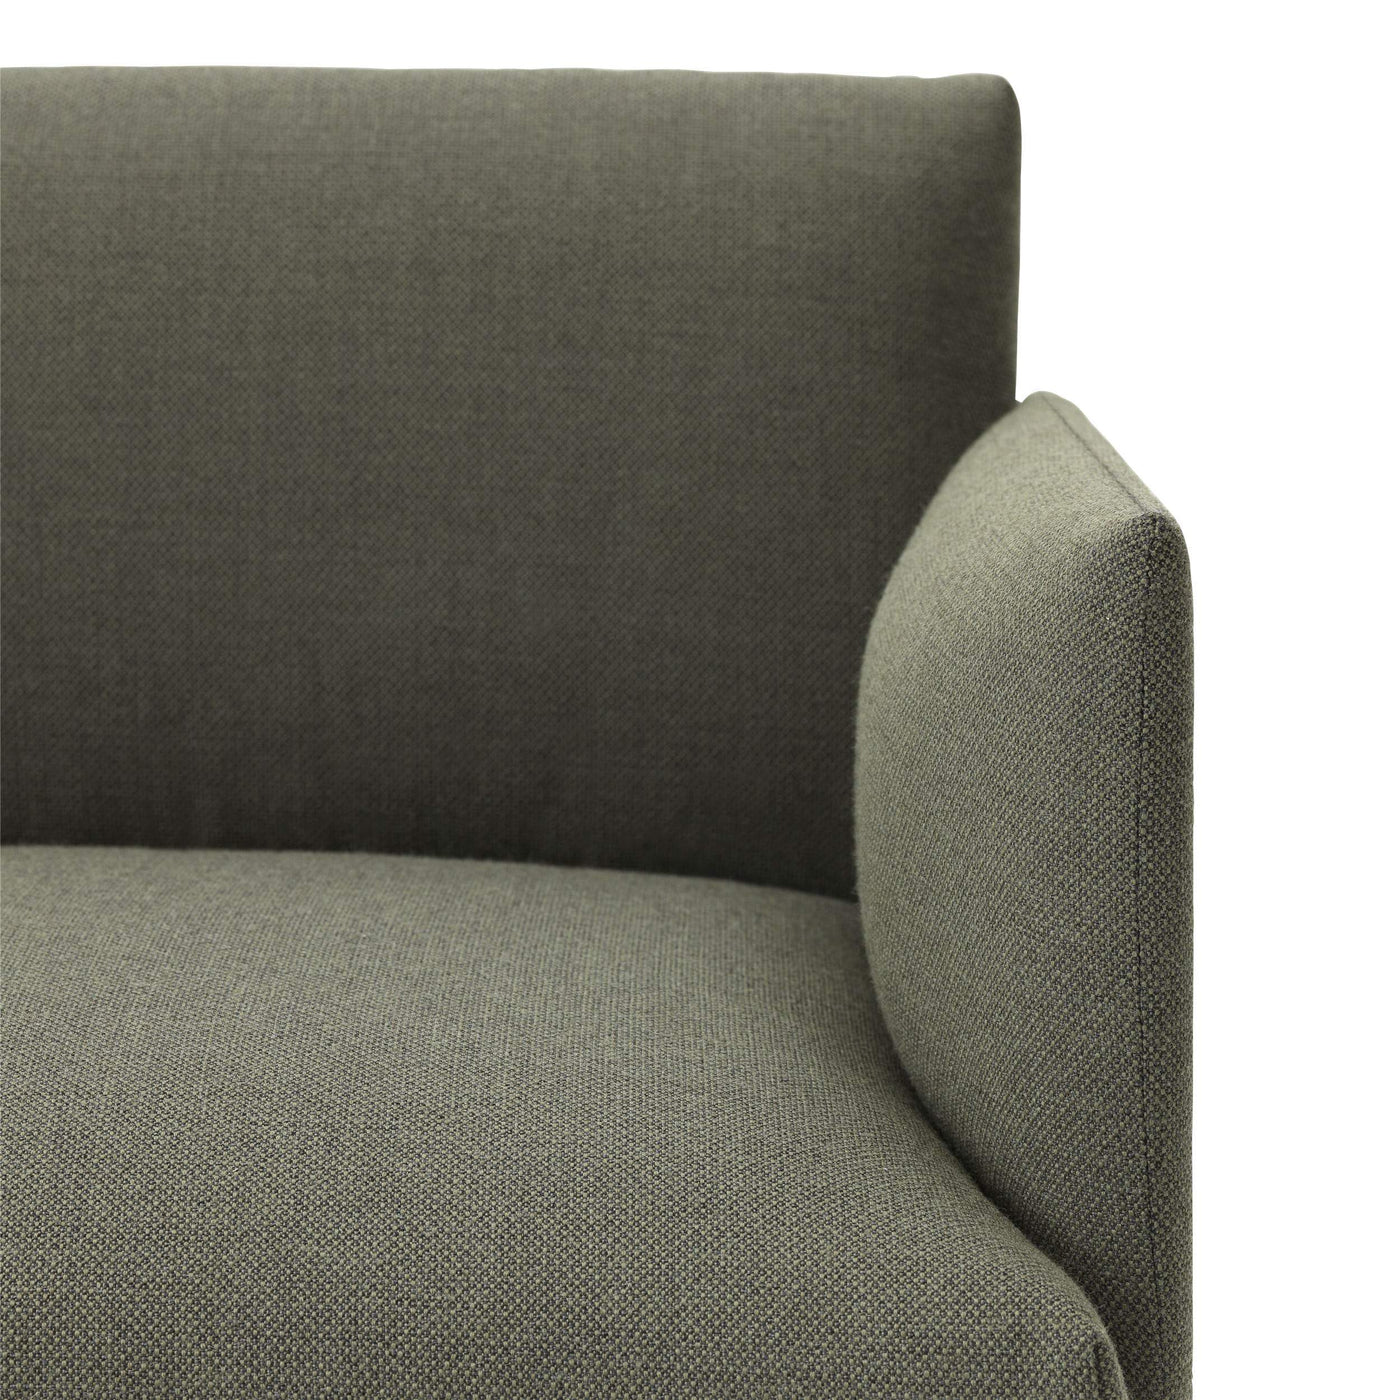 Fiord 961 by Kvadrat. Green upholstery fabric made to order for Muuto Rest, Connect & Outline sofas. Order free fabric swatches at someday designs. 